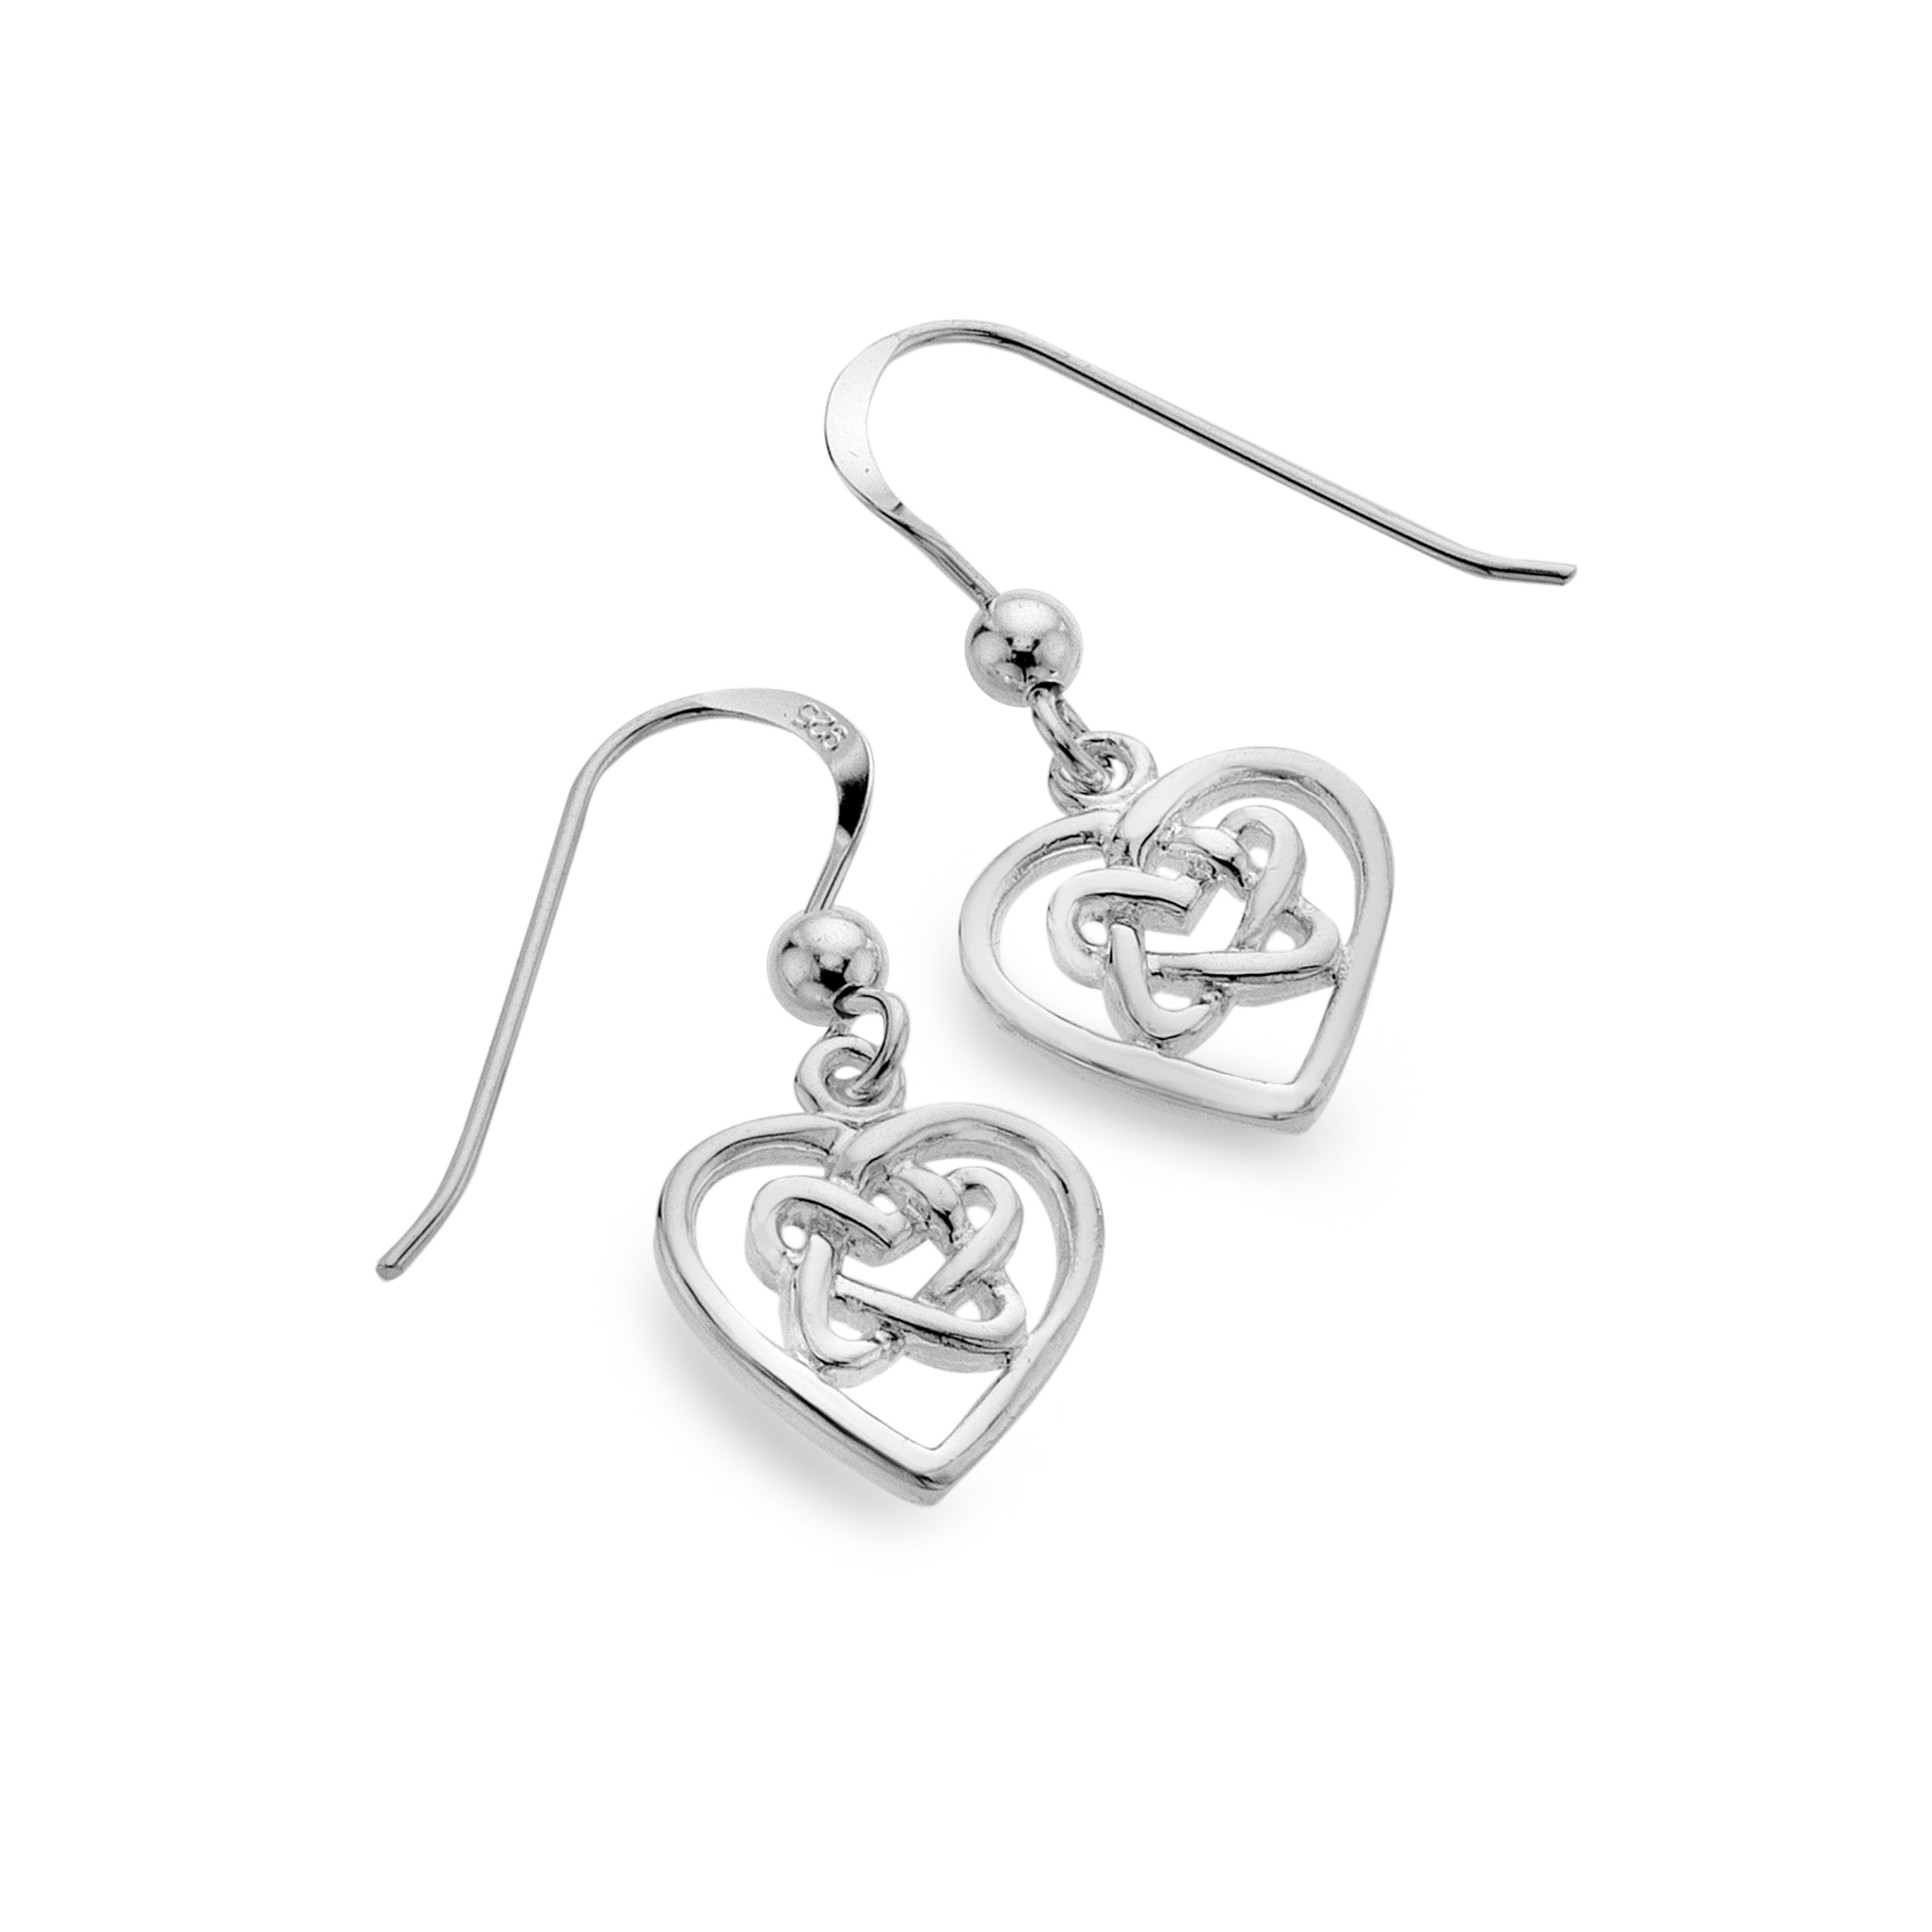 Adorable Vintage Sterling Silver Textured Heart Earrings Perfect for  Valentine's Day, Sterling Silver Heart Earrings, Love Earrings